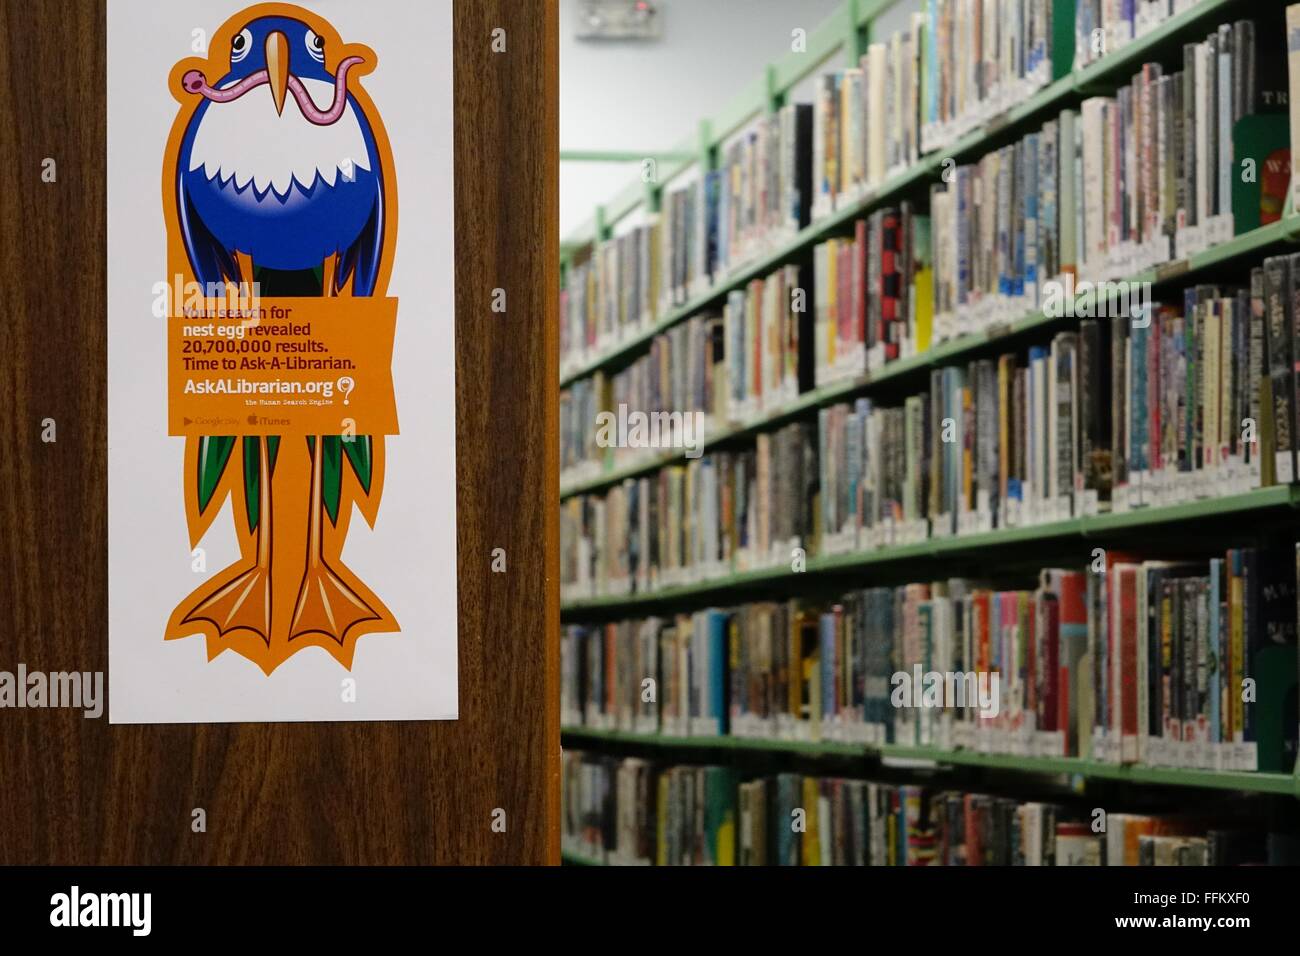 Poster promoting 'Ask-a-Librarian' and crowded bookshelves st the Ormond branch of the Volusia Public Library Stock Photo